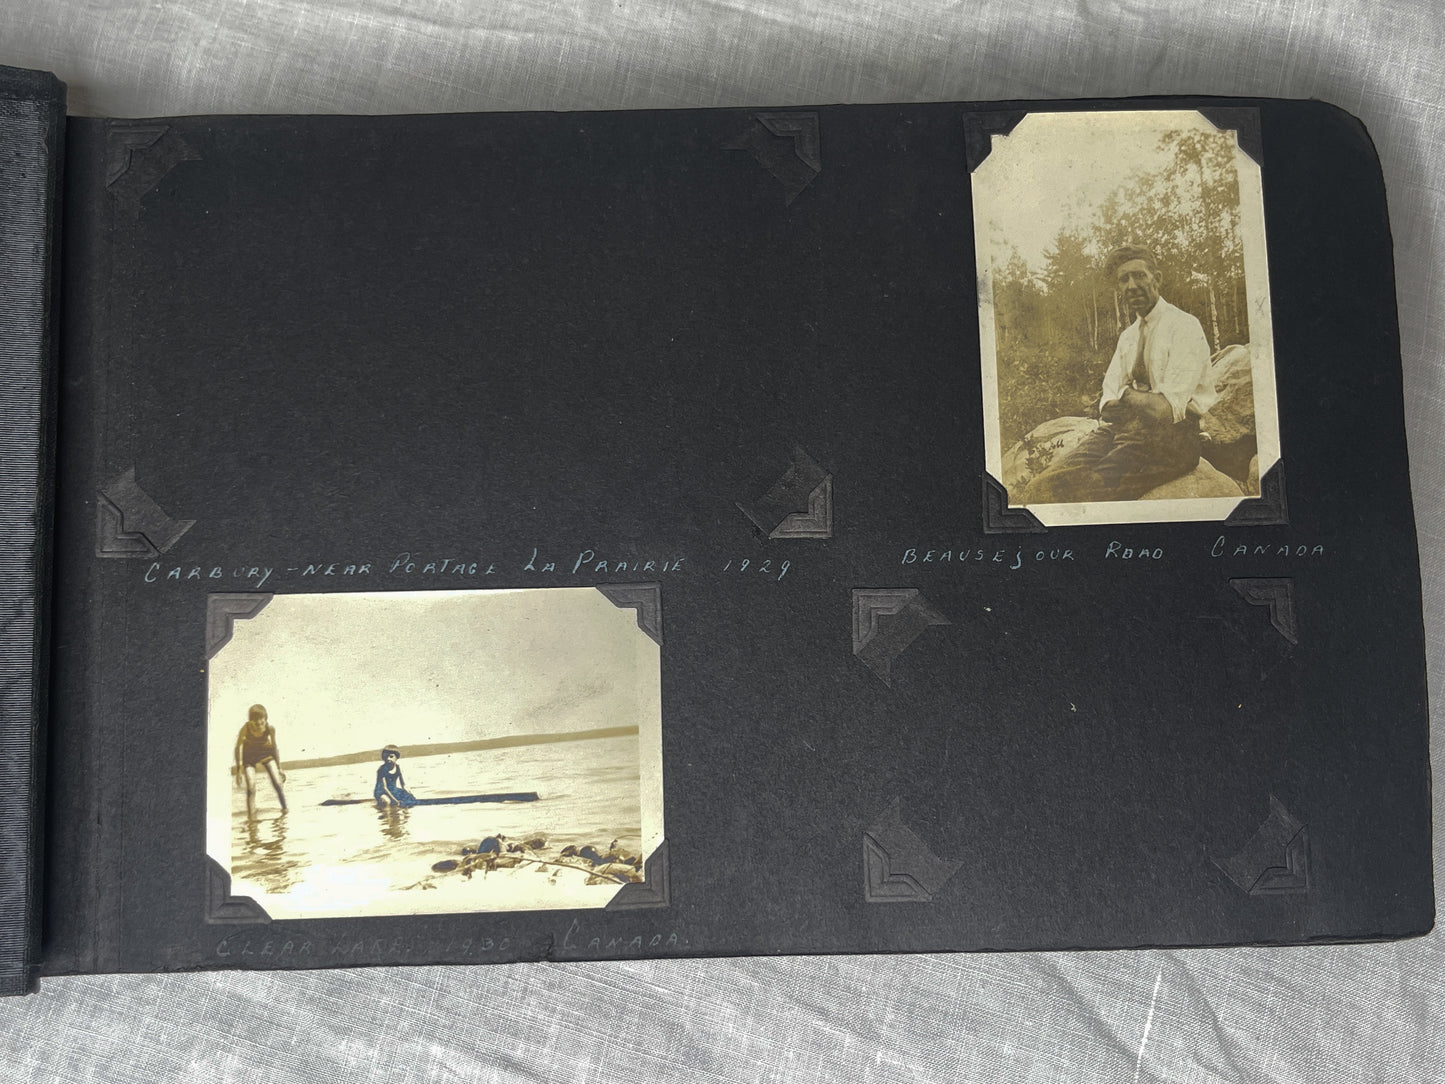 Vintage 1930's Photo Album with over 120 Photographs.